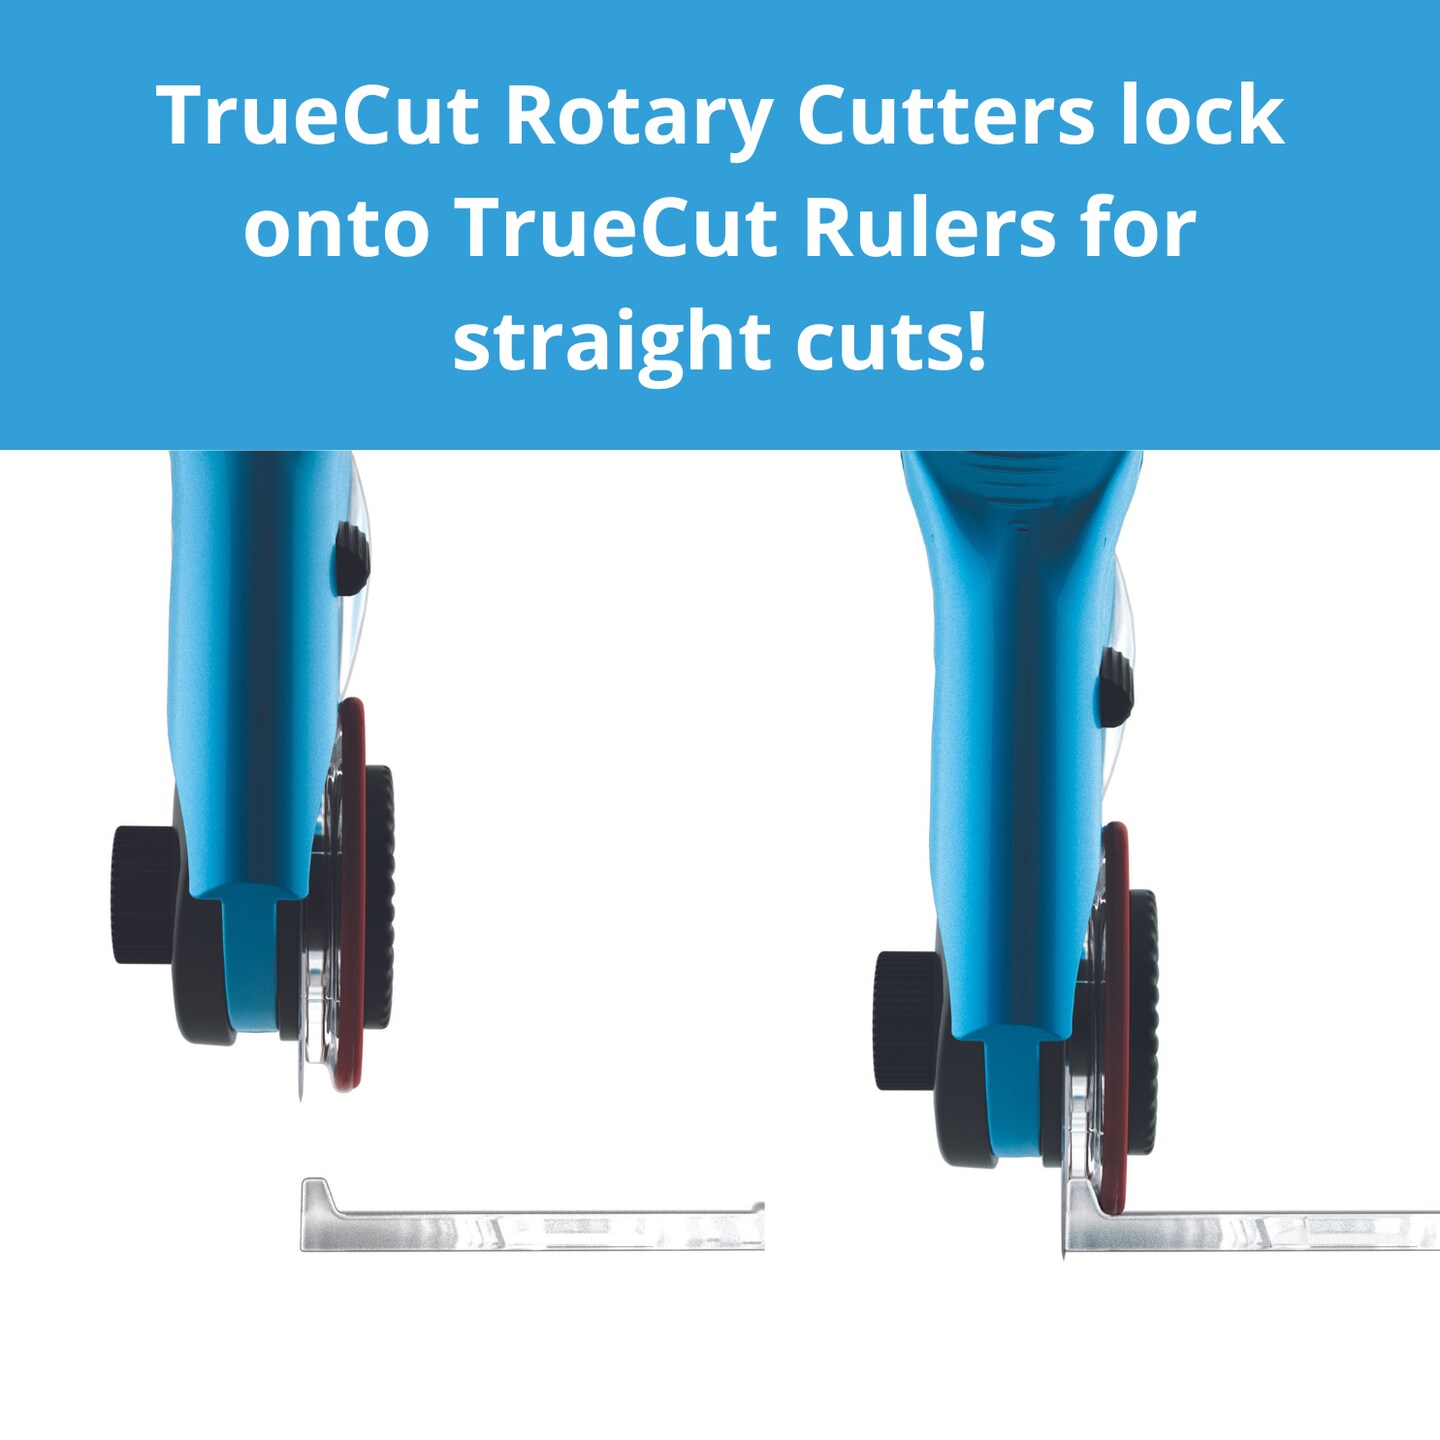 TrueCut Master Ruler Combo with 45mm Rotary Cutter